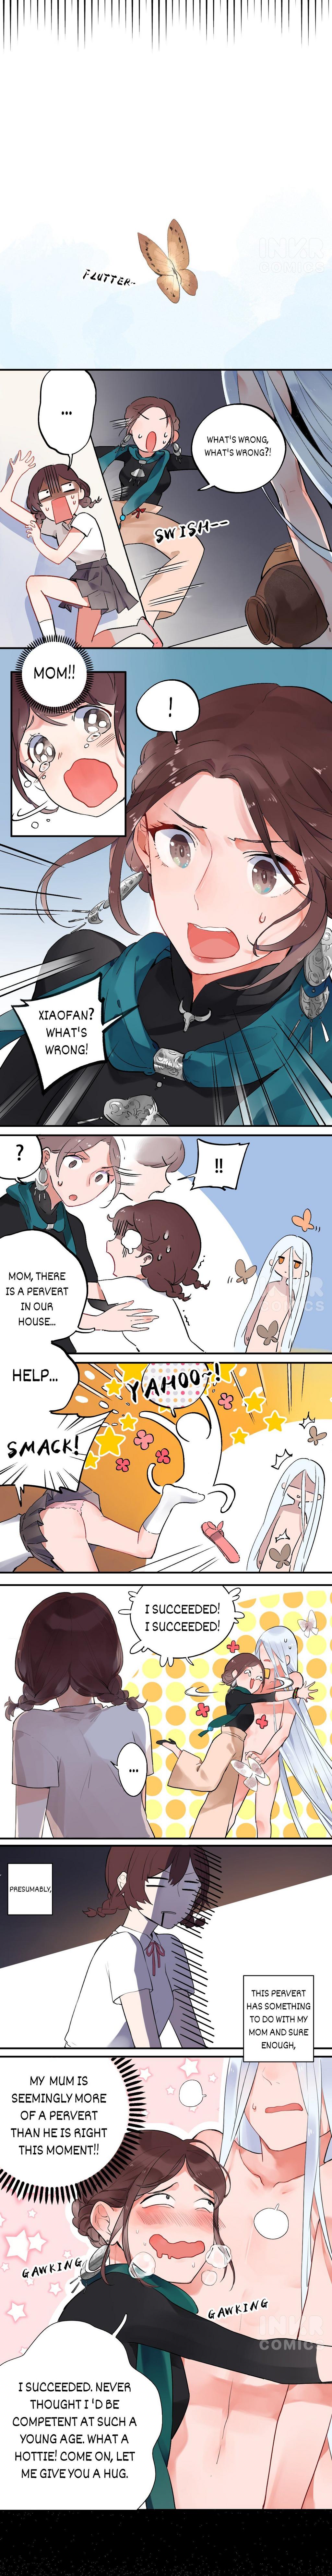 Sos! Falling In Love With A Moth! - Page 3